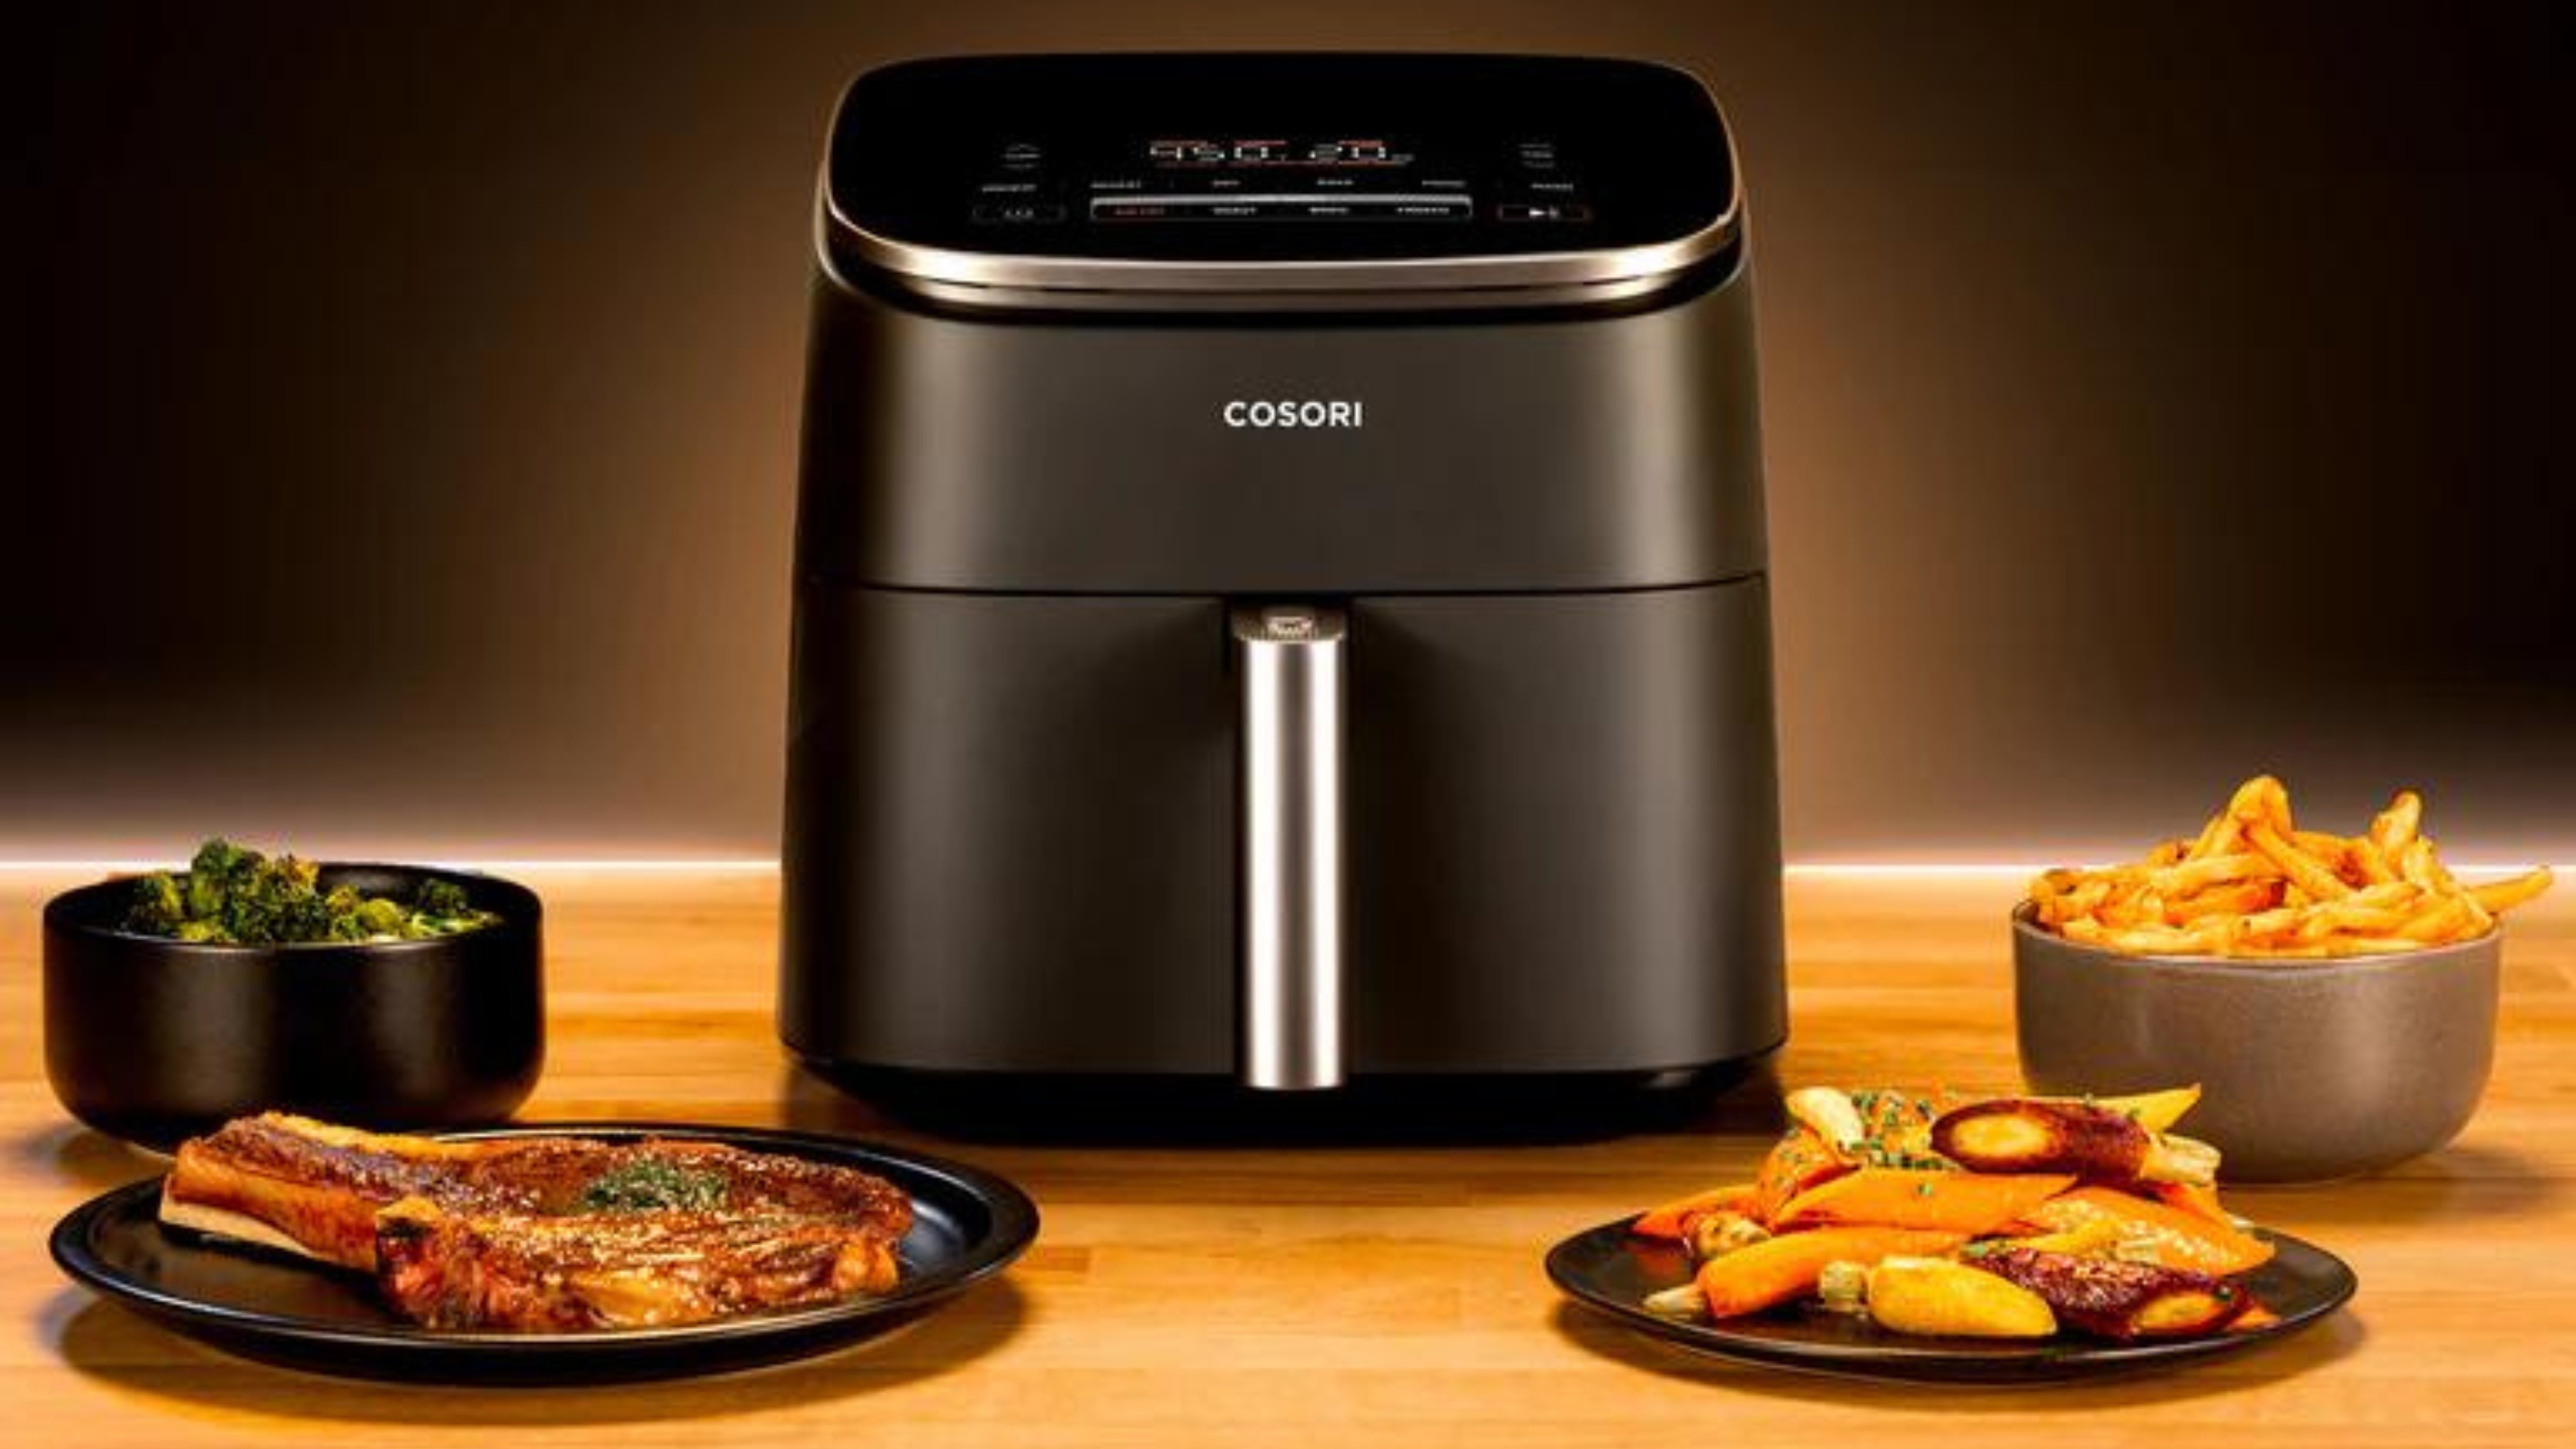 How To Use Cosori Air Fryer